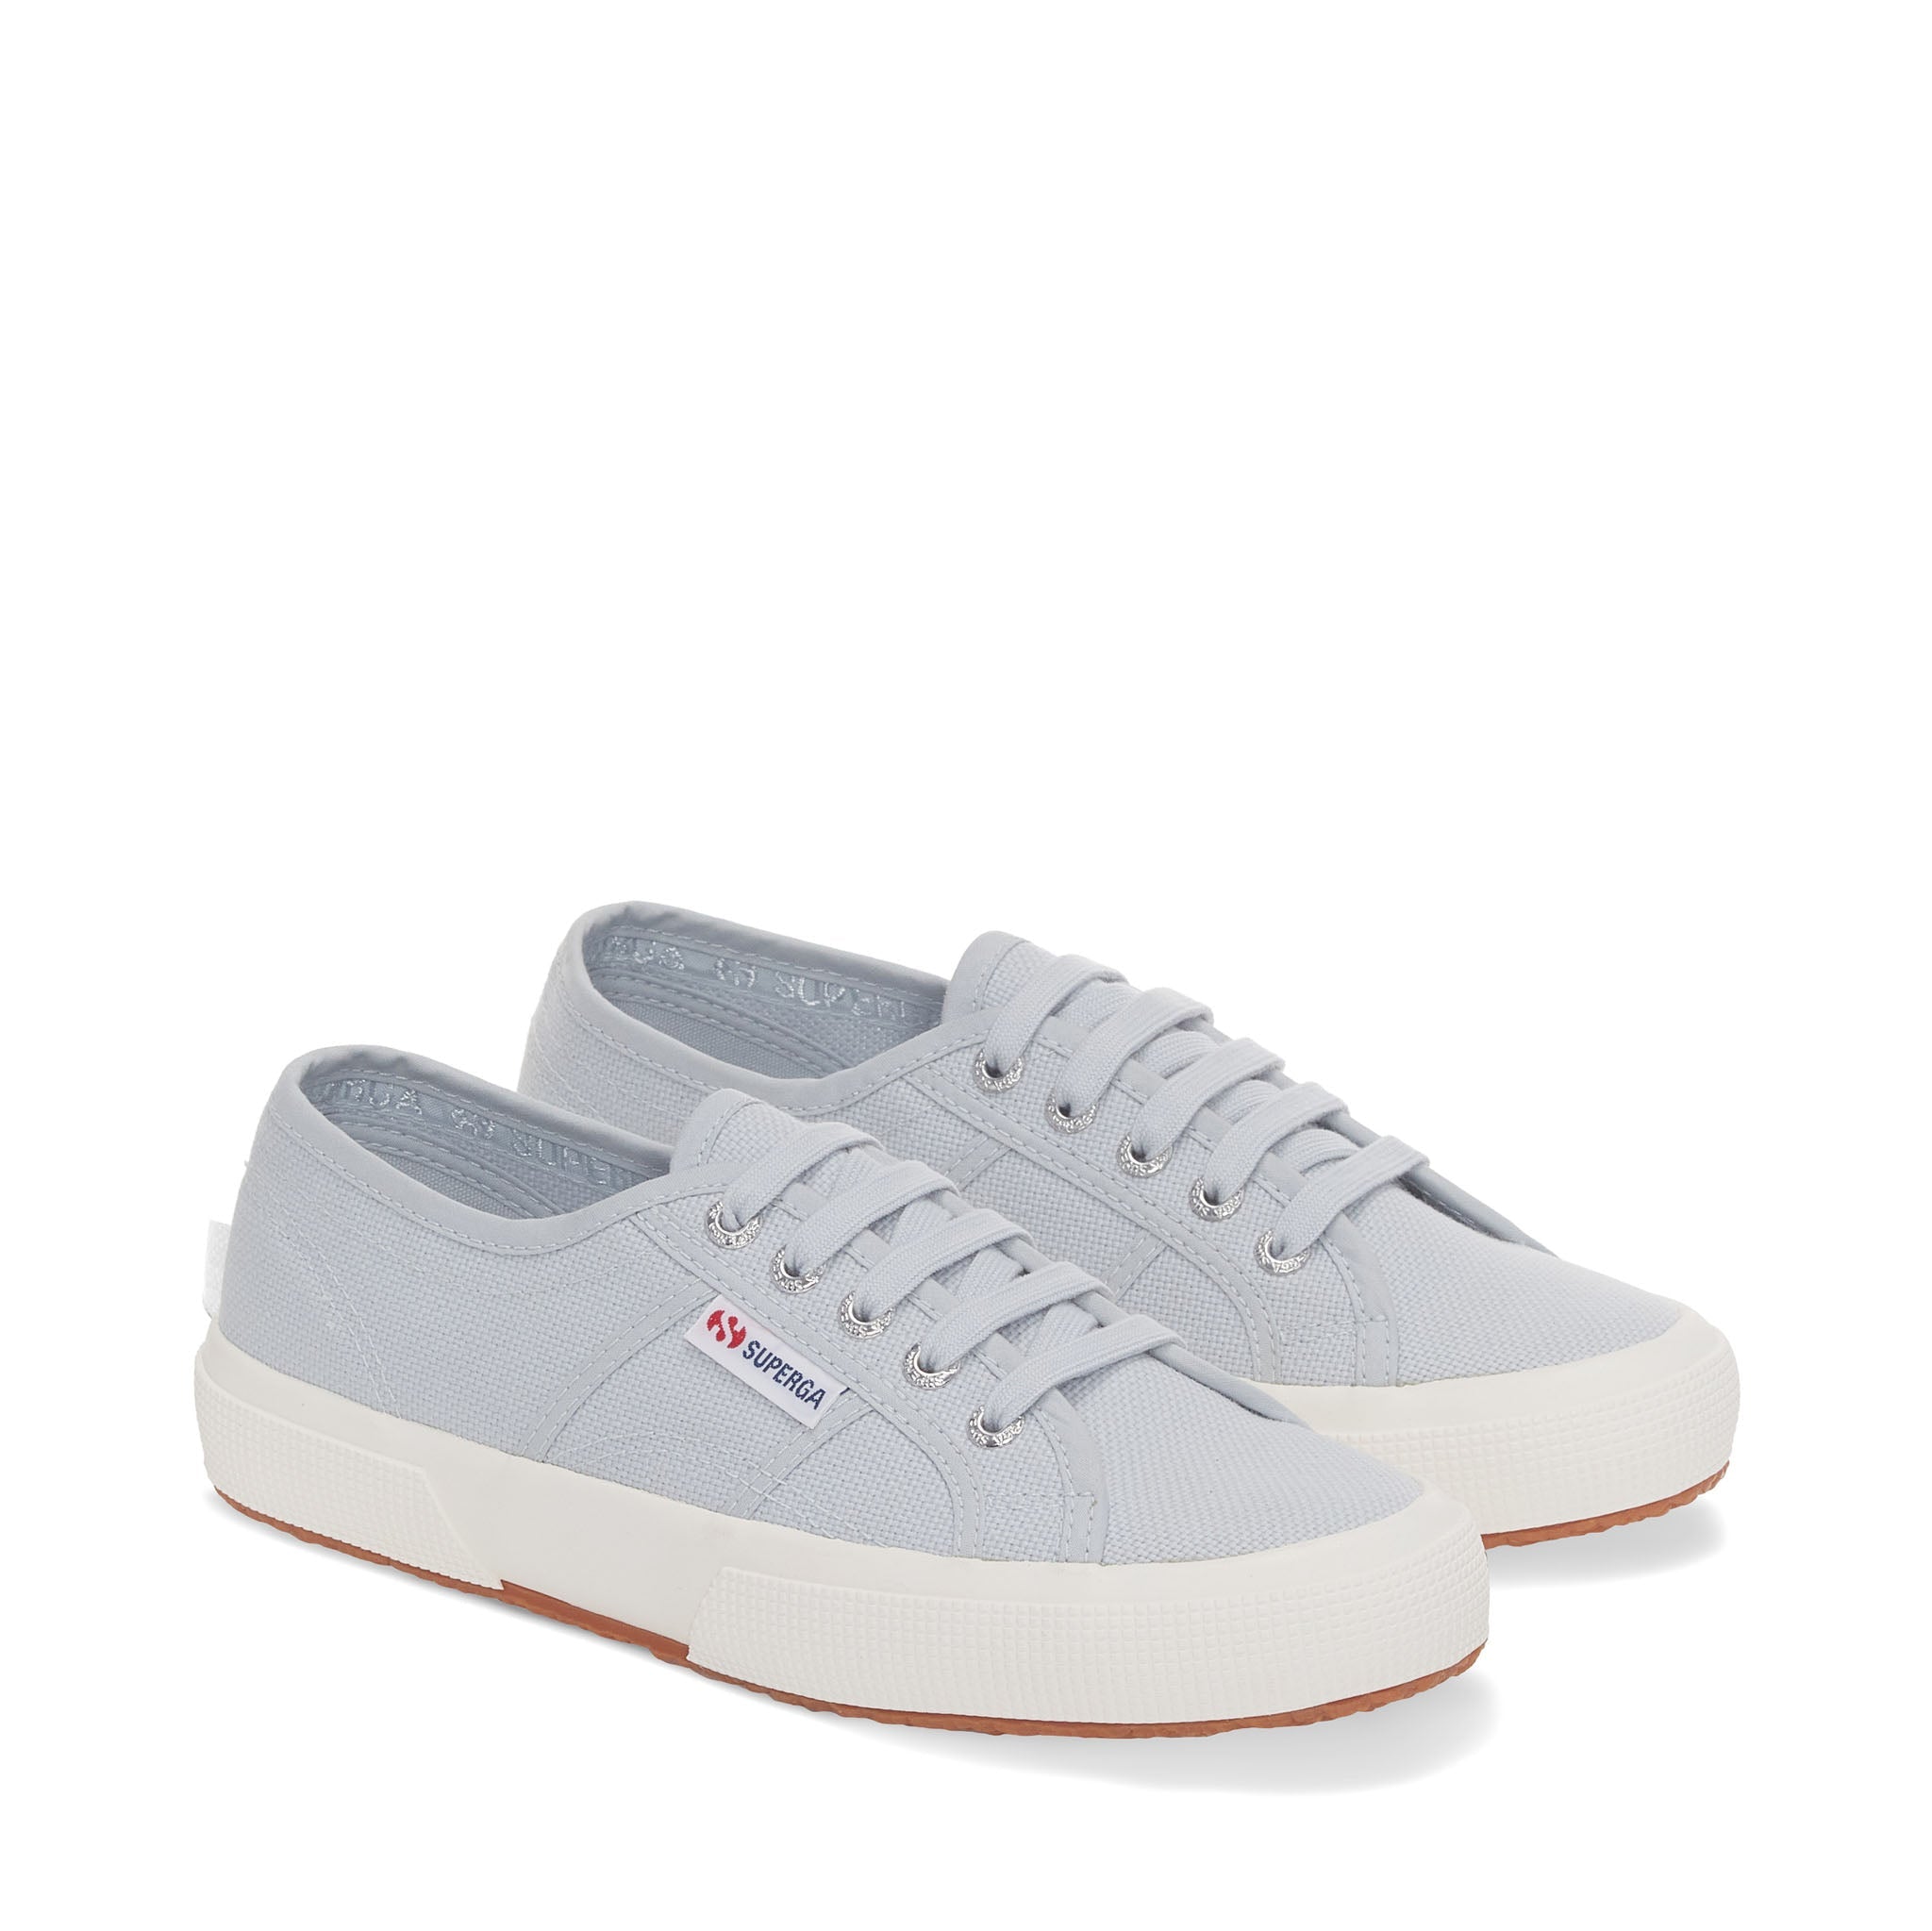 Superga 2750 Cotu Classic Sneakers - Grey. Front view.